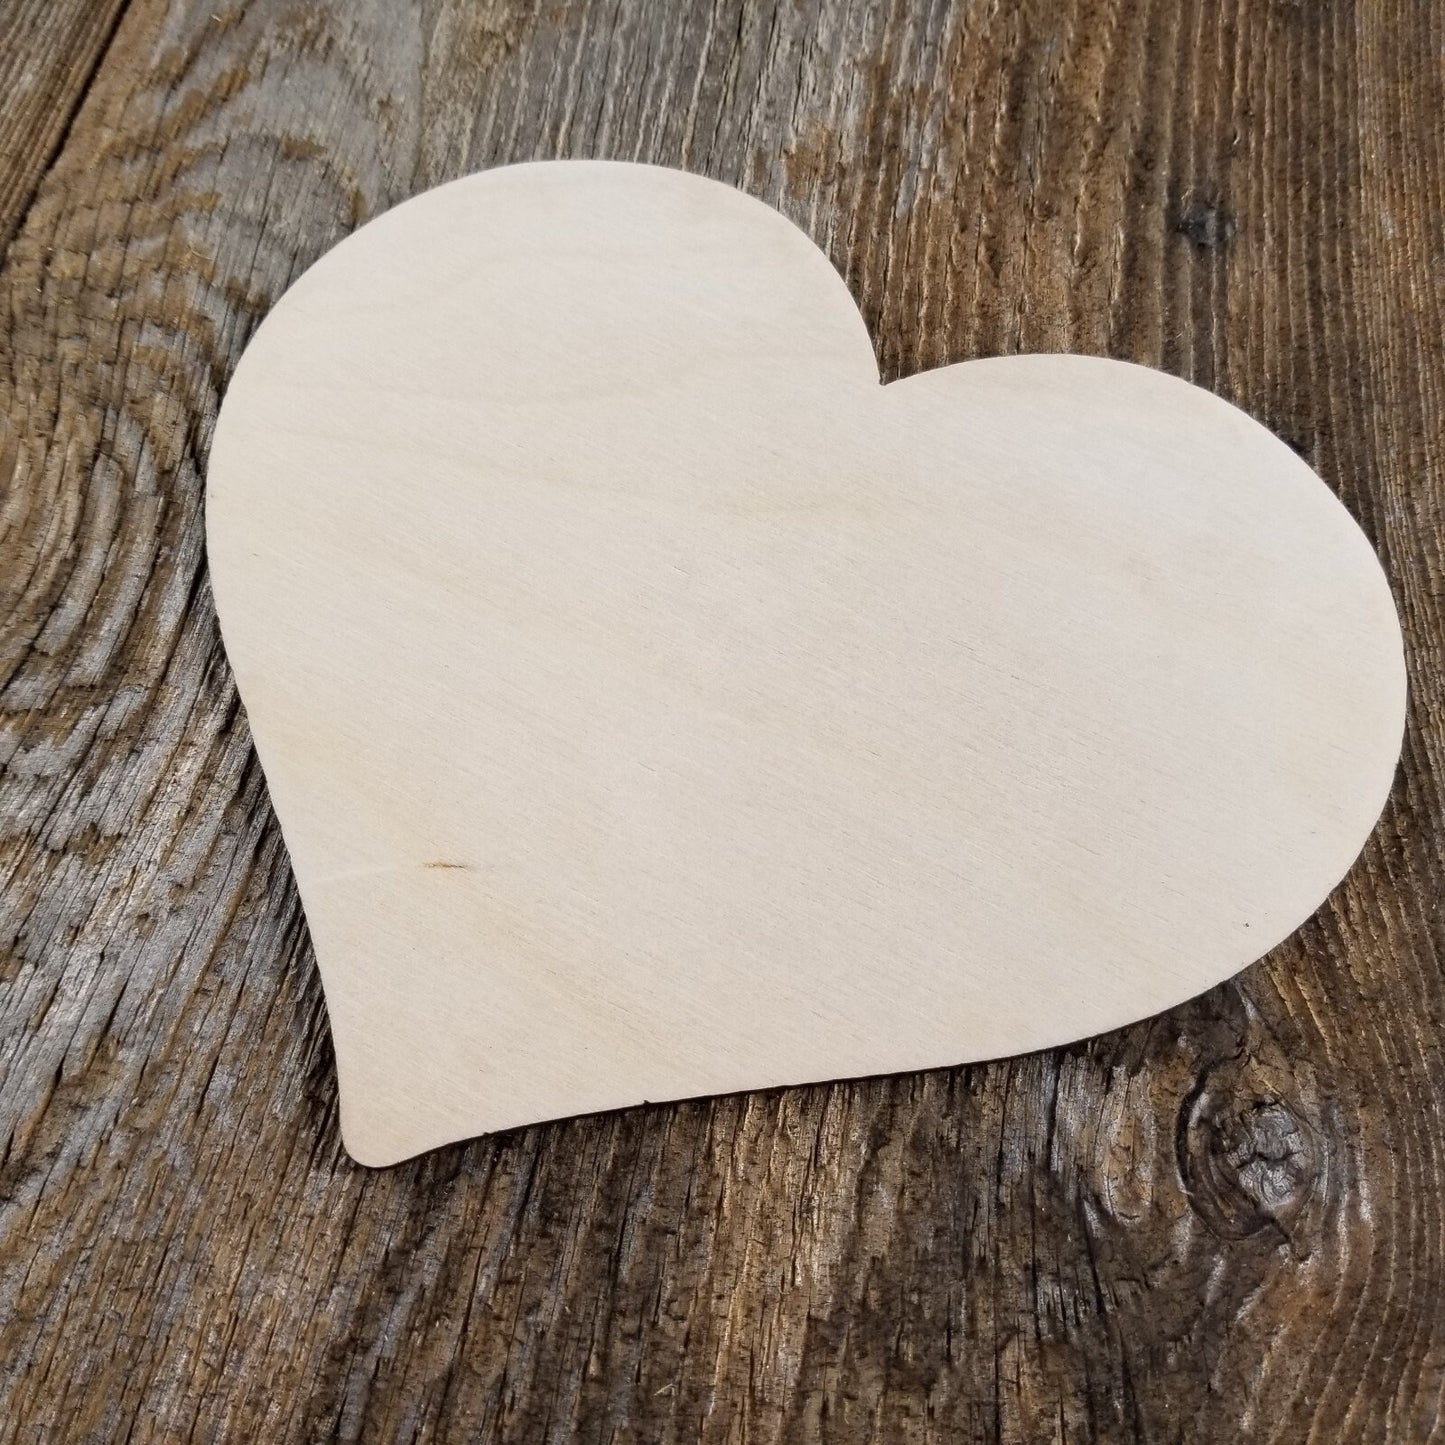 Color Your Own Wood Art ONLY DIY - Wood Trivet - Coloring Project - Craft Supply - Adult Craft Project - Floral Relaxation Gift Heart #2